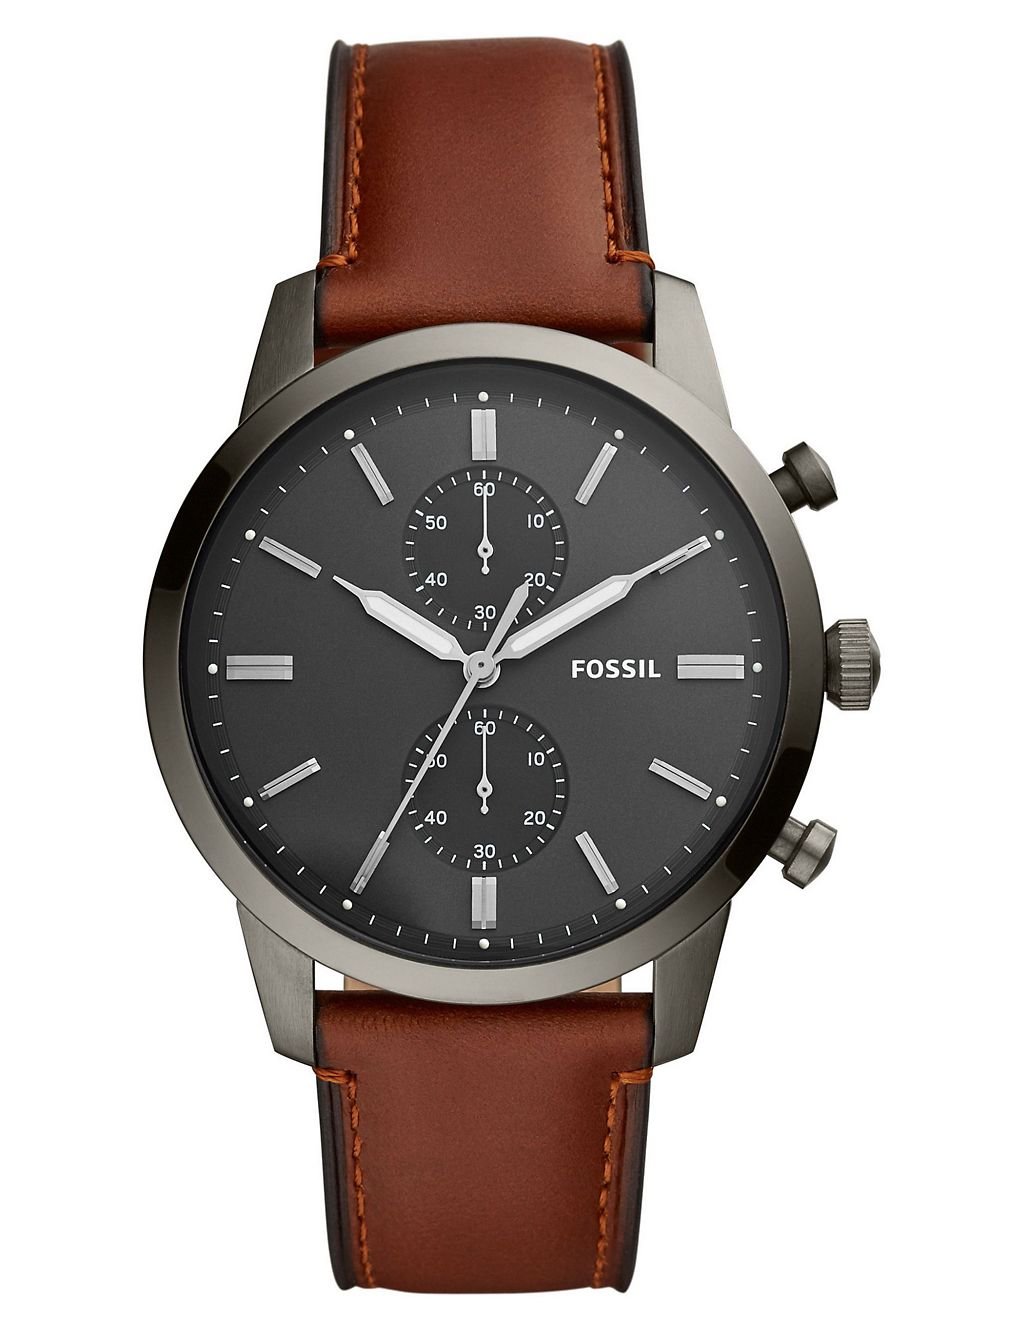 Fossil Townsman Brown Leather Watch 3 of 3